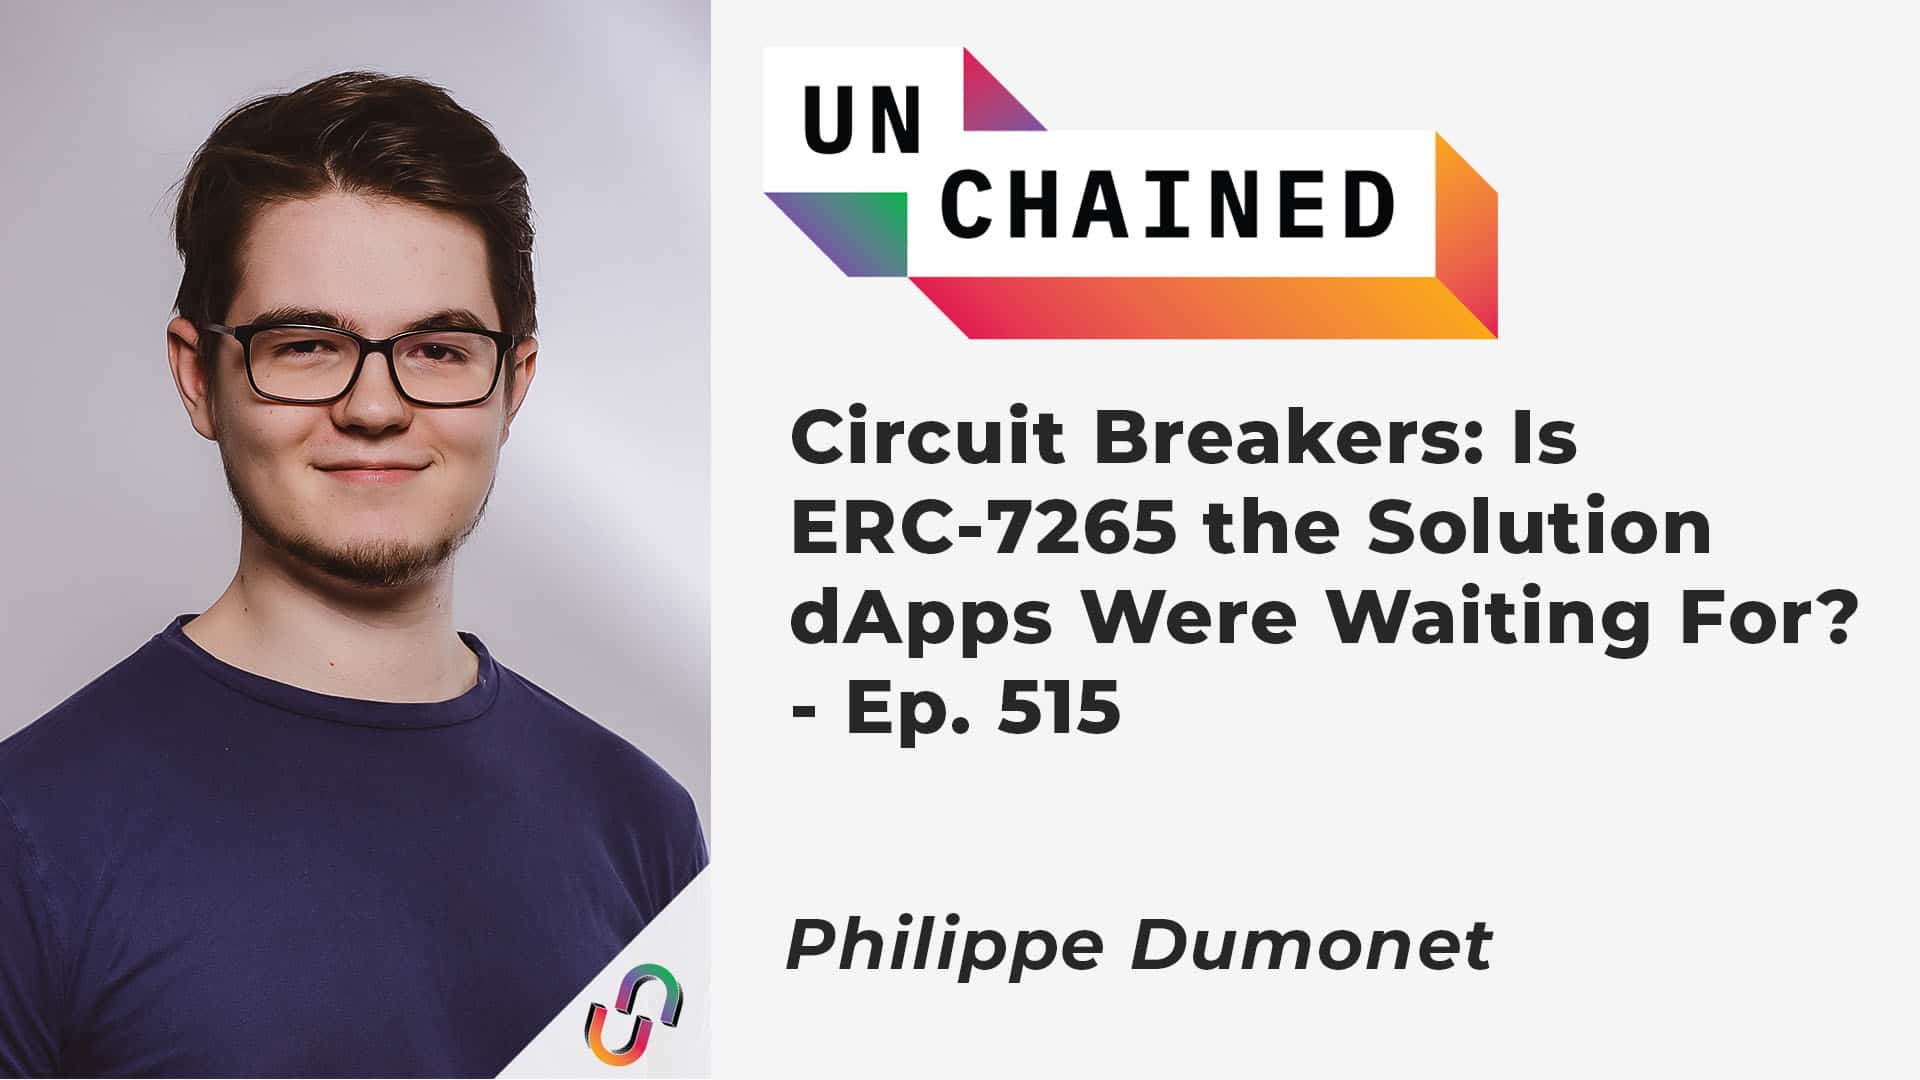 Circuit Breakers: Is ERC-7265 the Solution dApps Were Waiting For? - Ep. 515